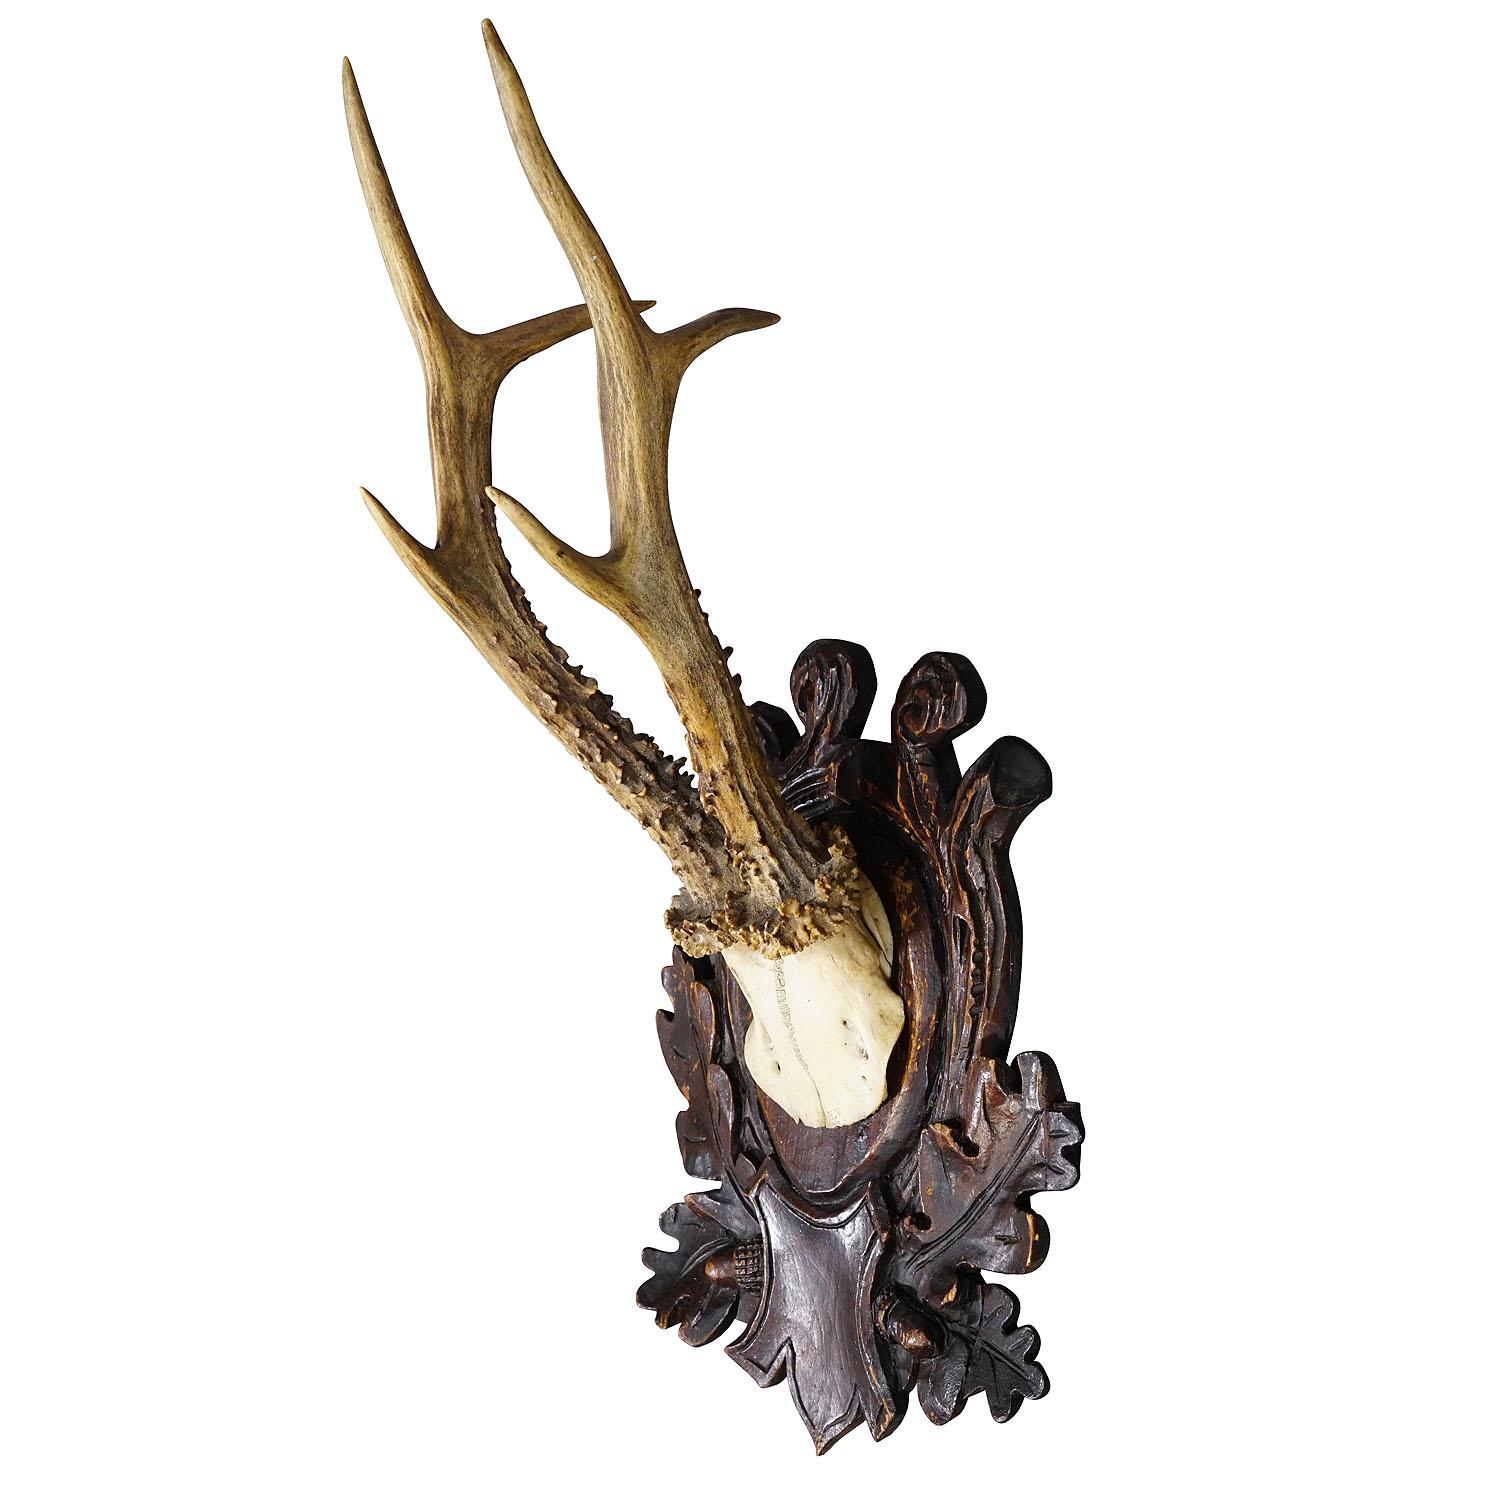 Large Black Forest Roe Deer Trophy on Carved Plaque

A great antique roe deer (Capreolus capreolus) trophy on a wooden carved plaque. The trophy was shot around 1930. A great fit to your rustic cabin decoration. Plaque with old repairs - see